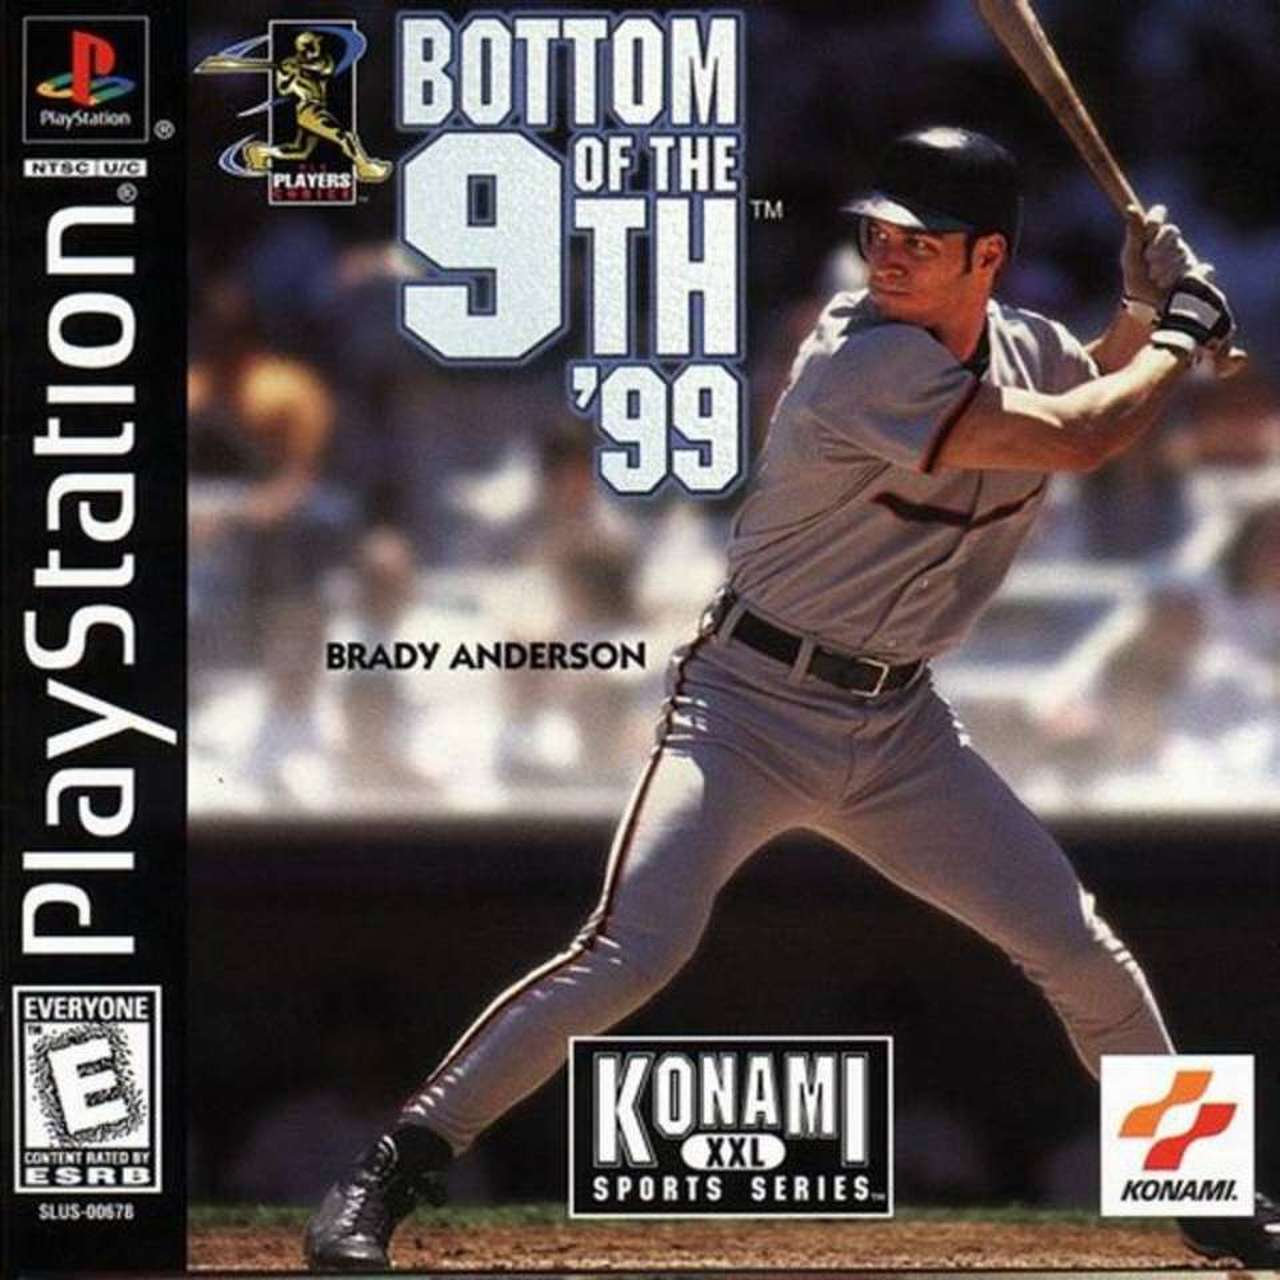 Bottom of the 9th ’99 player count stats